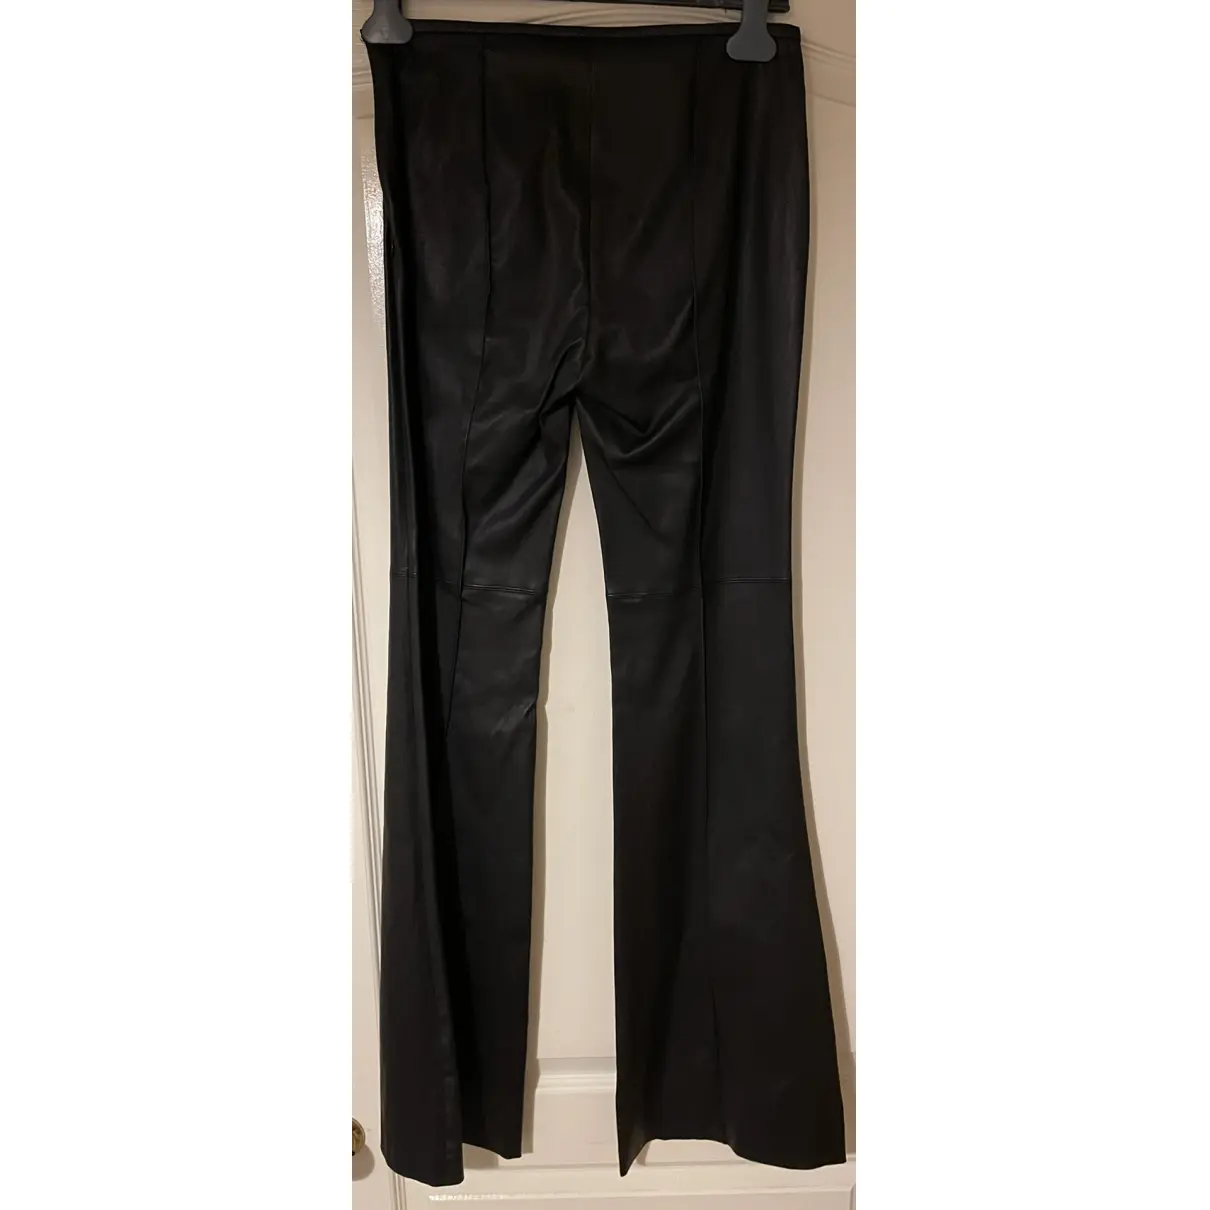 Buy Michael Kors Leather trousers online